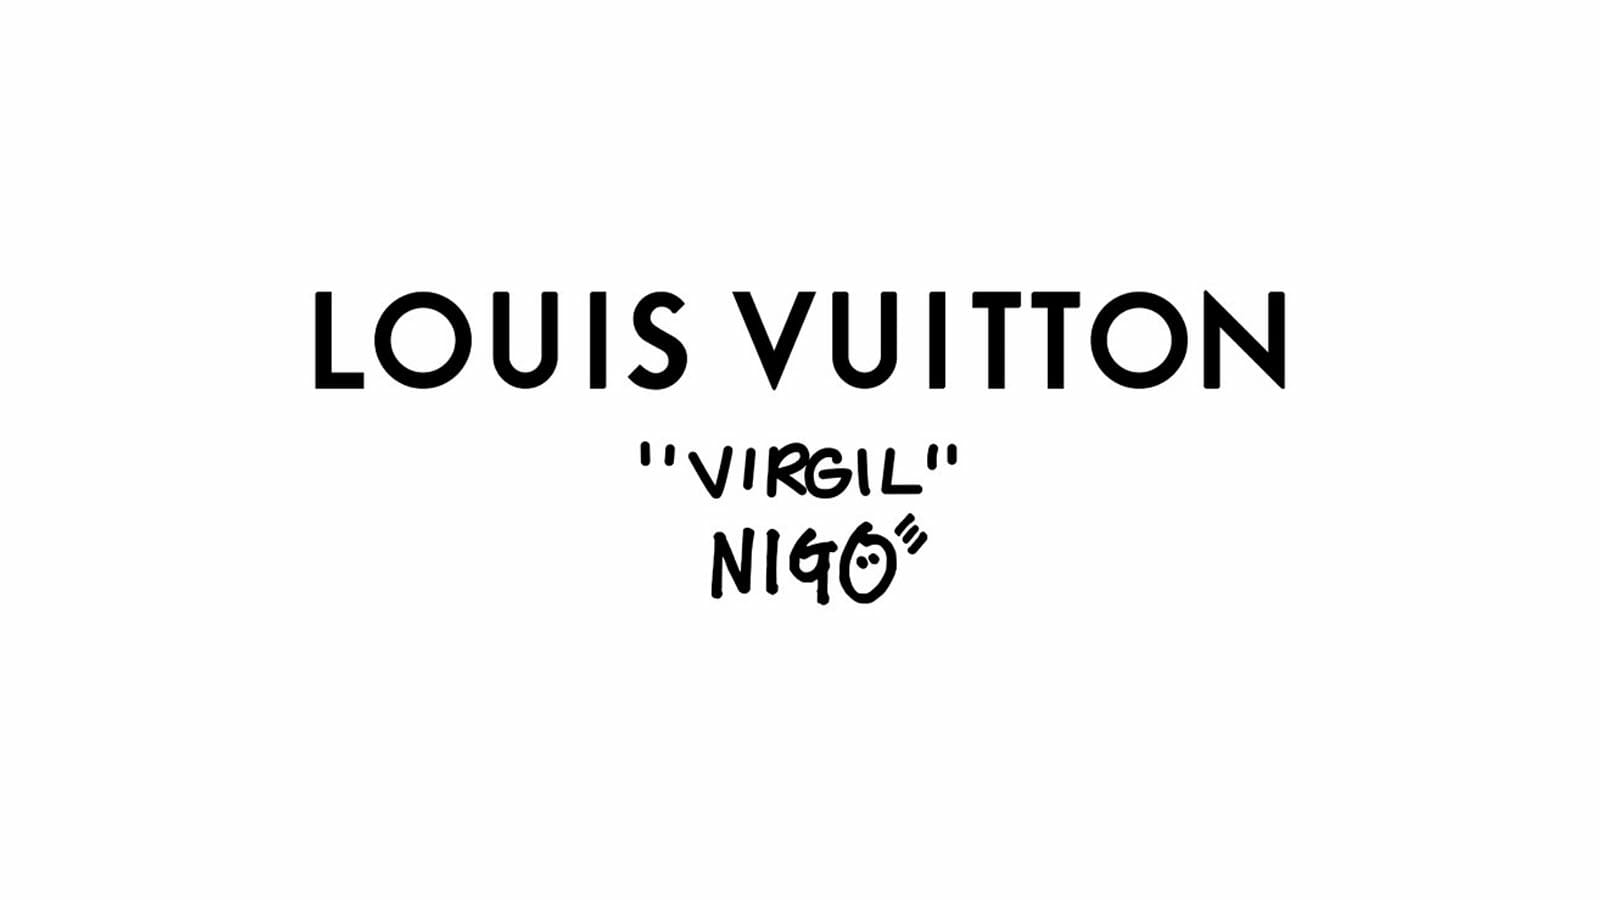 Here's a look at the Virgil Abloh X Nigo Louis Vuitton capsule collection